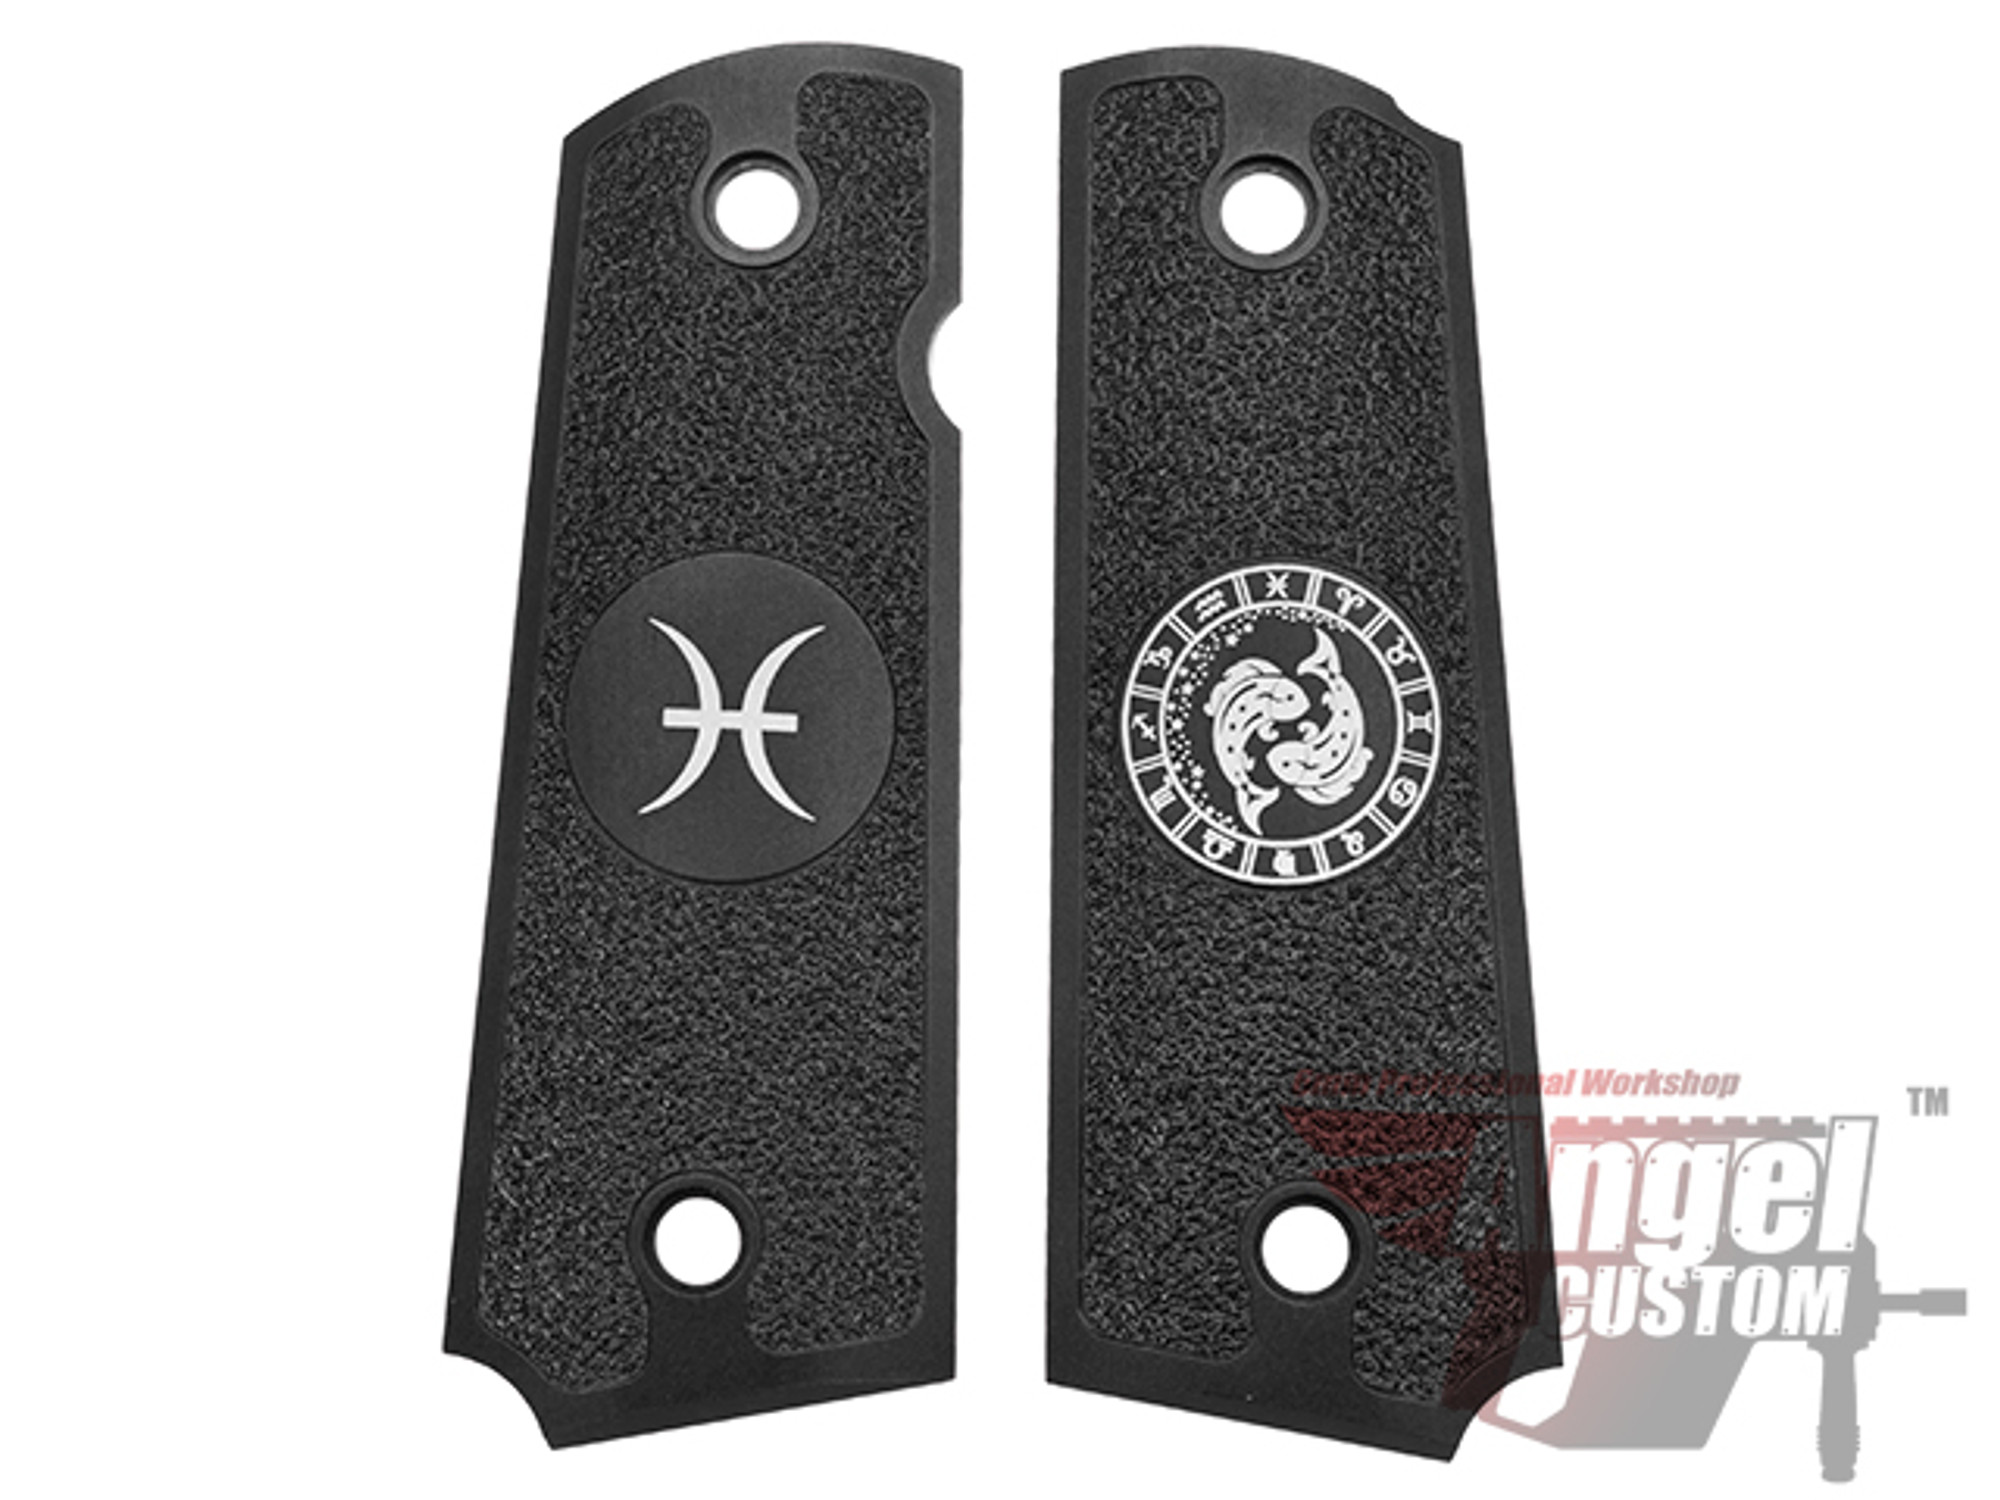 Angel Custom CNC Machined Tac-Glove "Zodiac" Grips for WE-Tech 1911 Series Airsoft Pistols - Pisces (Black)